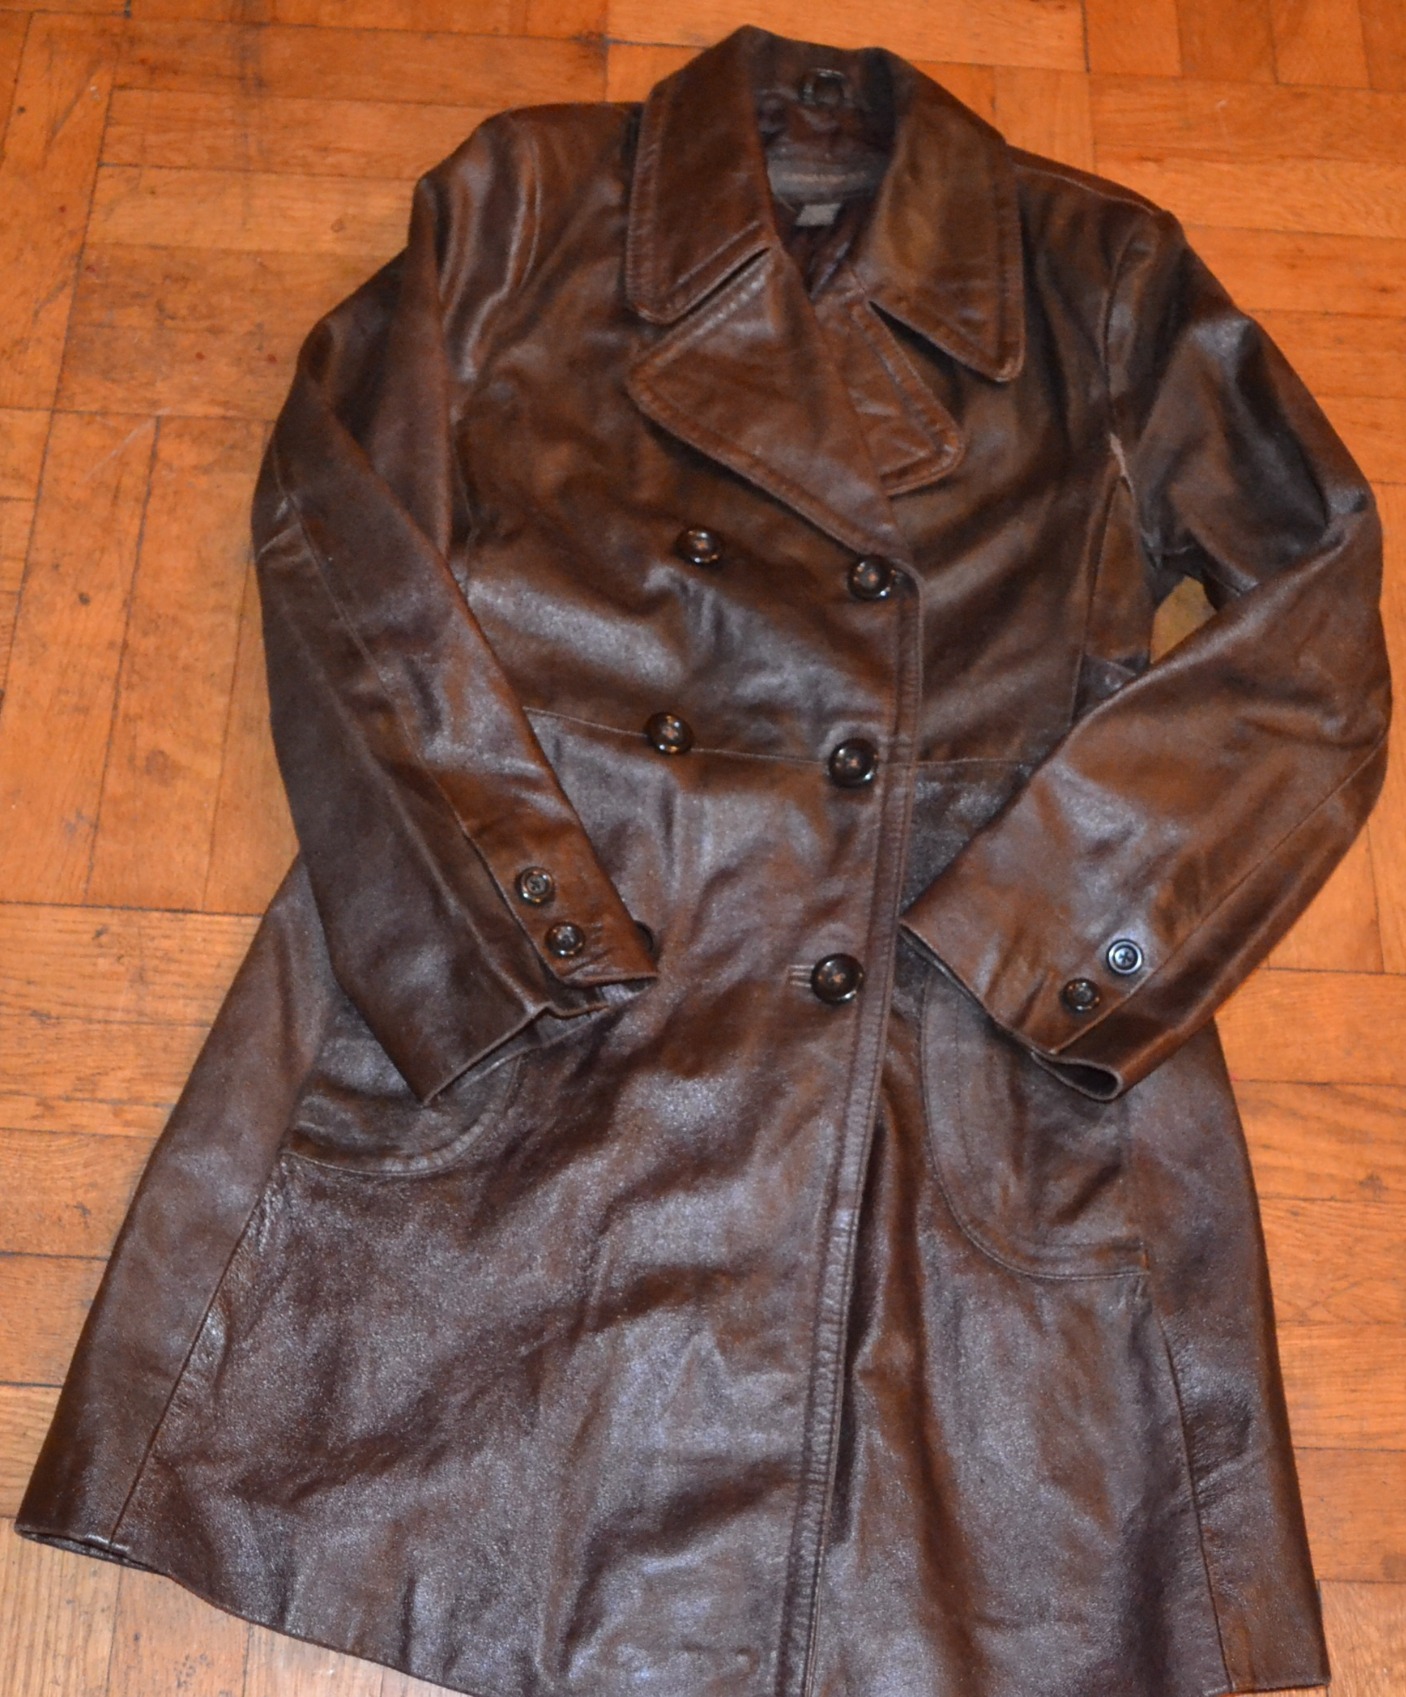 Banana Republic leather trench coat | Looking Fly on a Dime